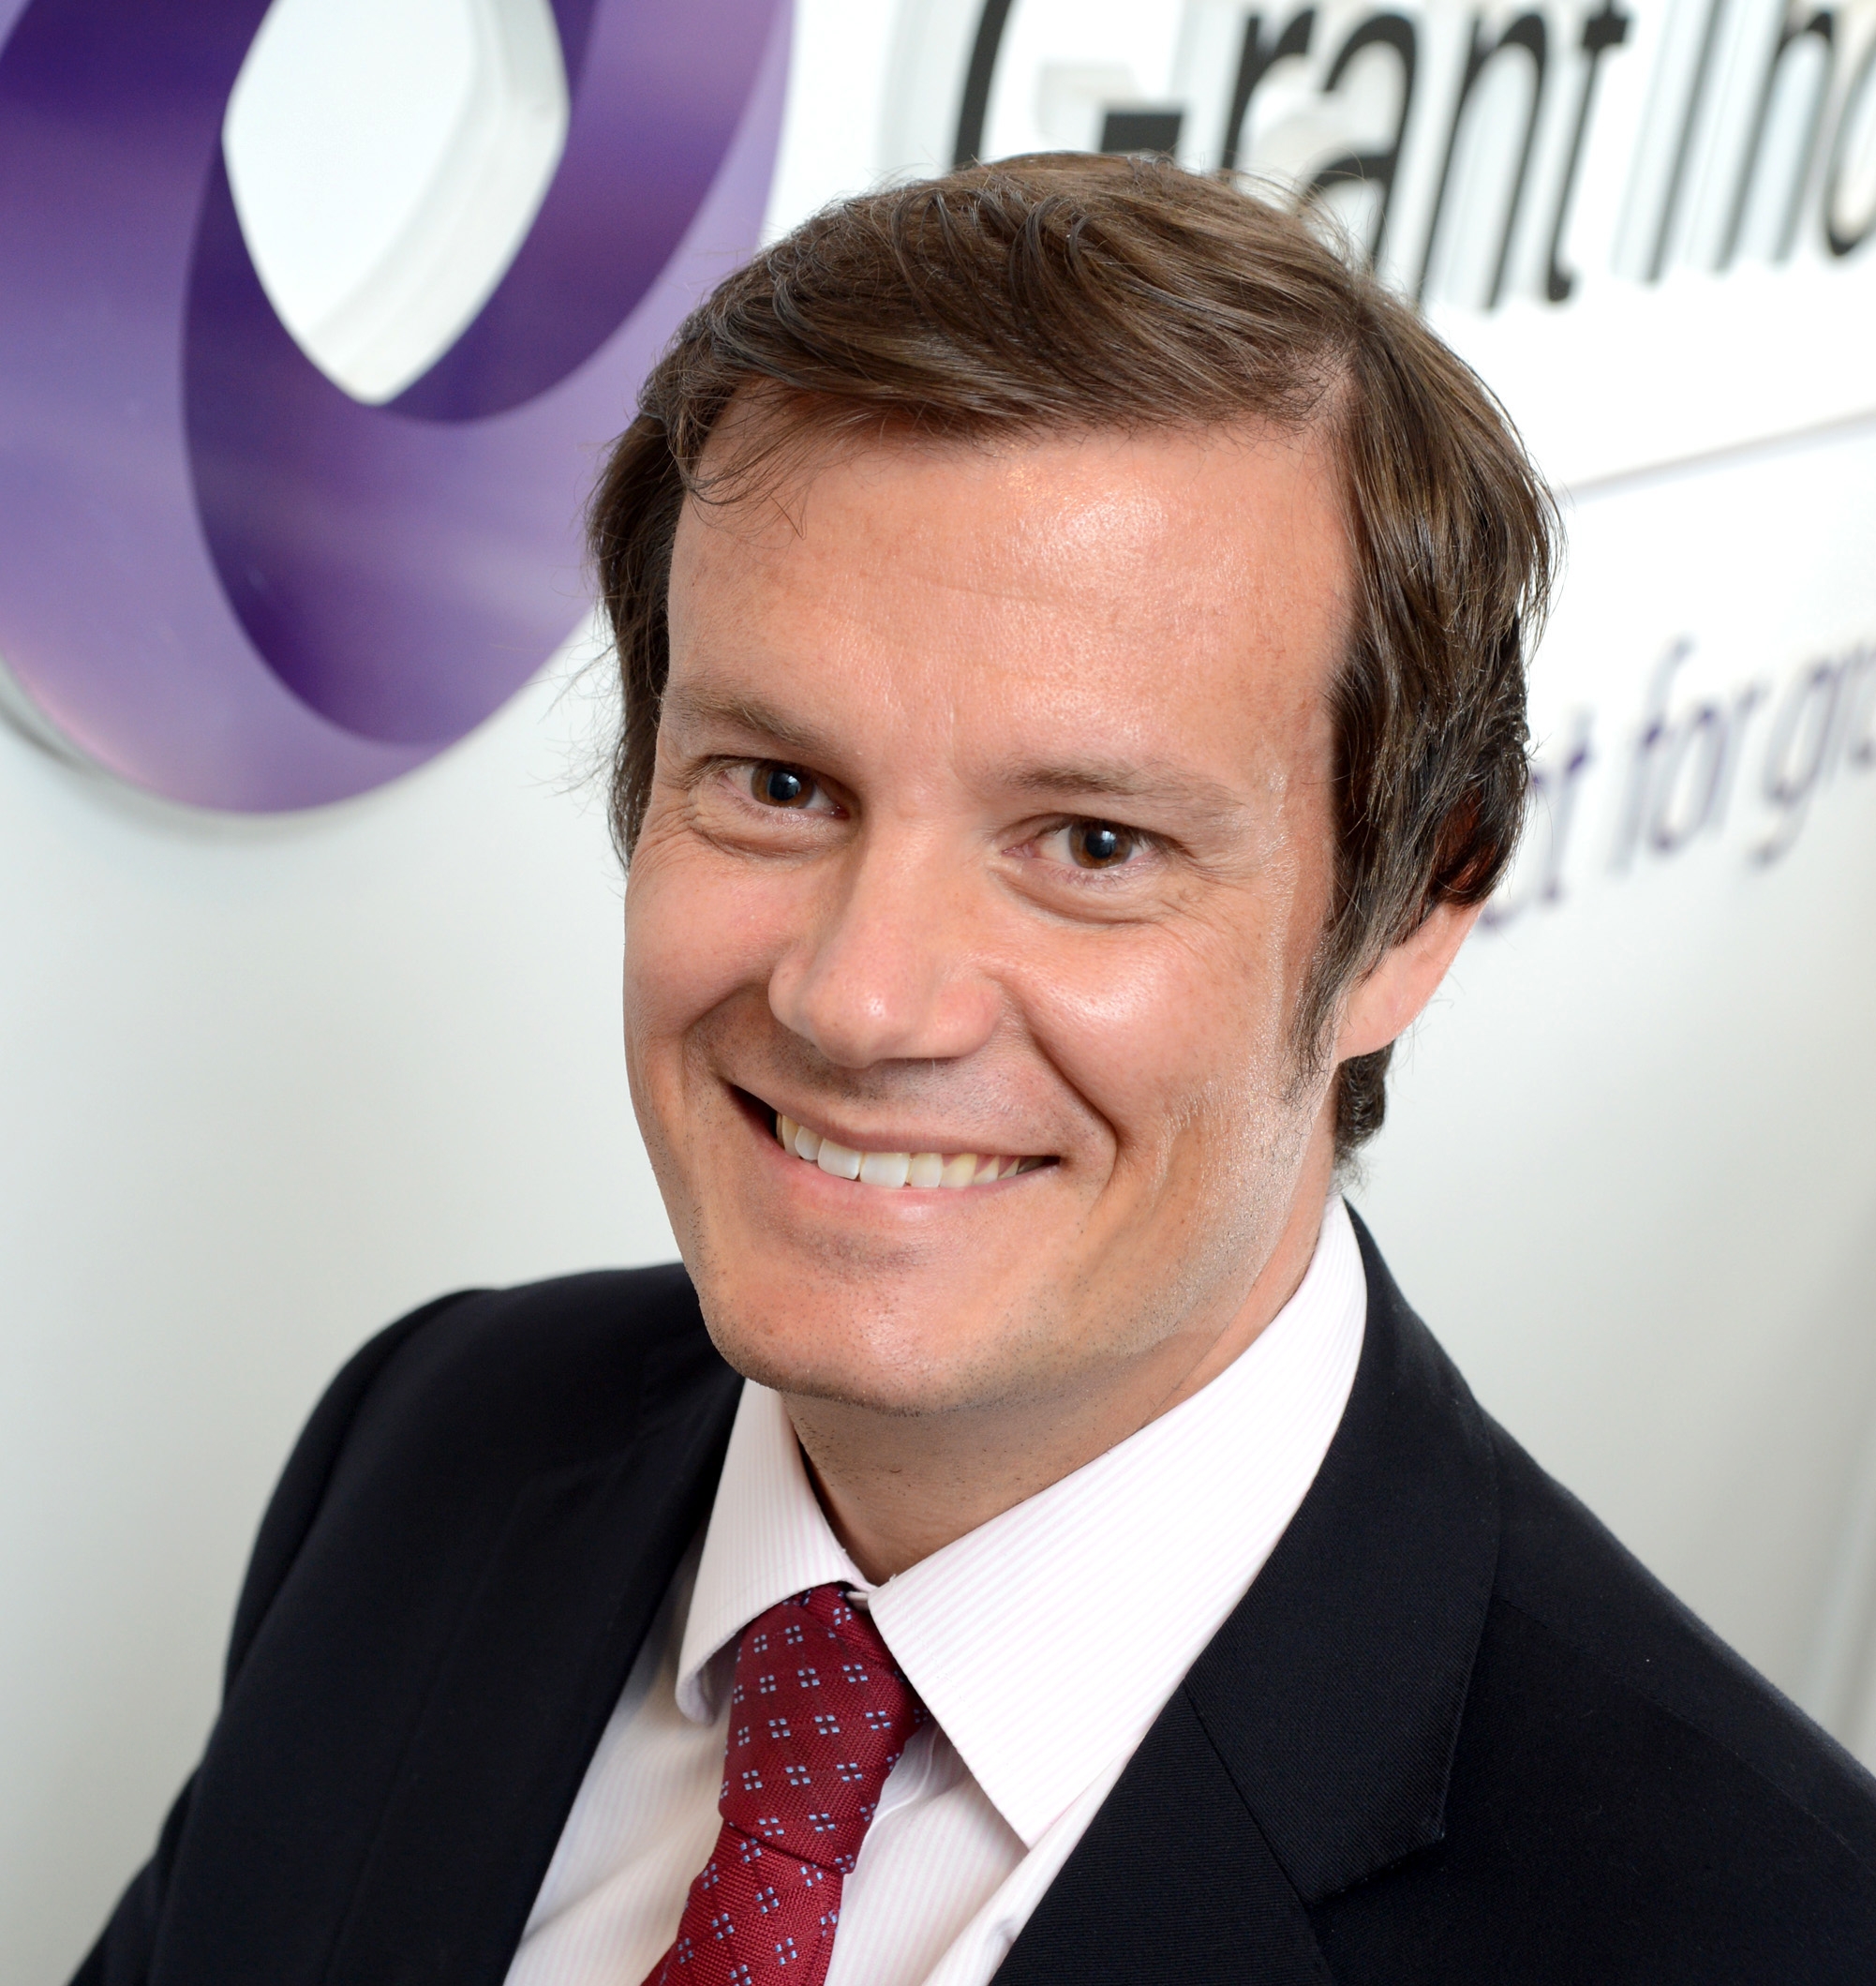 Local businesses urged to contribute to Grant Thornton’s manifesto for Hertfordshire’s future